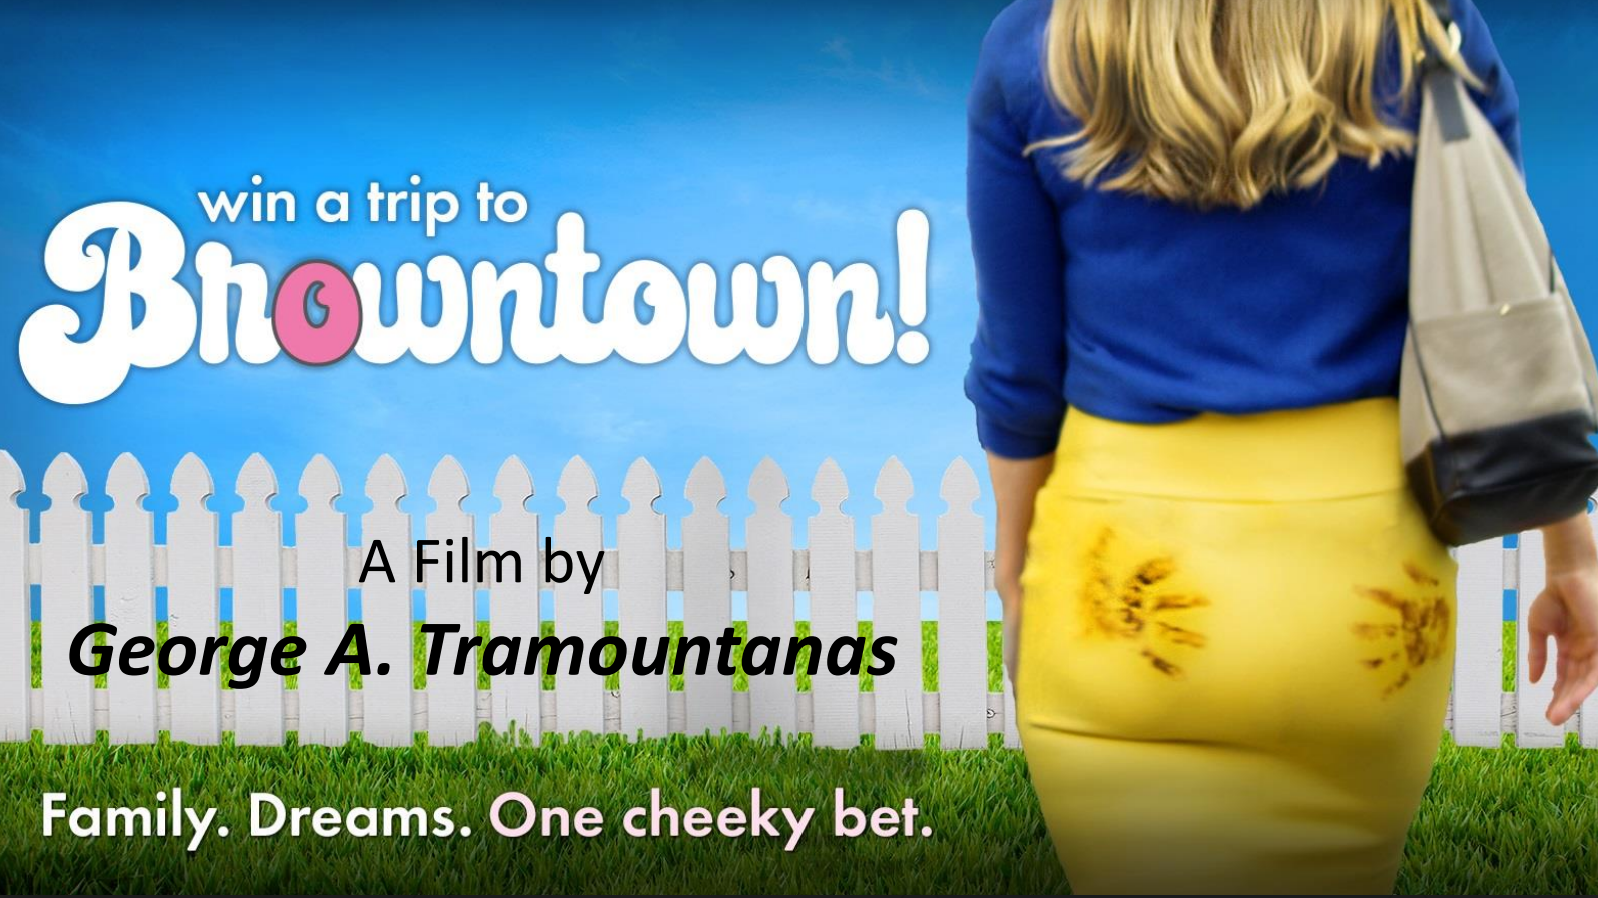 win a trip to browntown